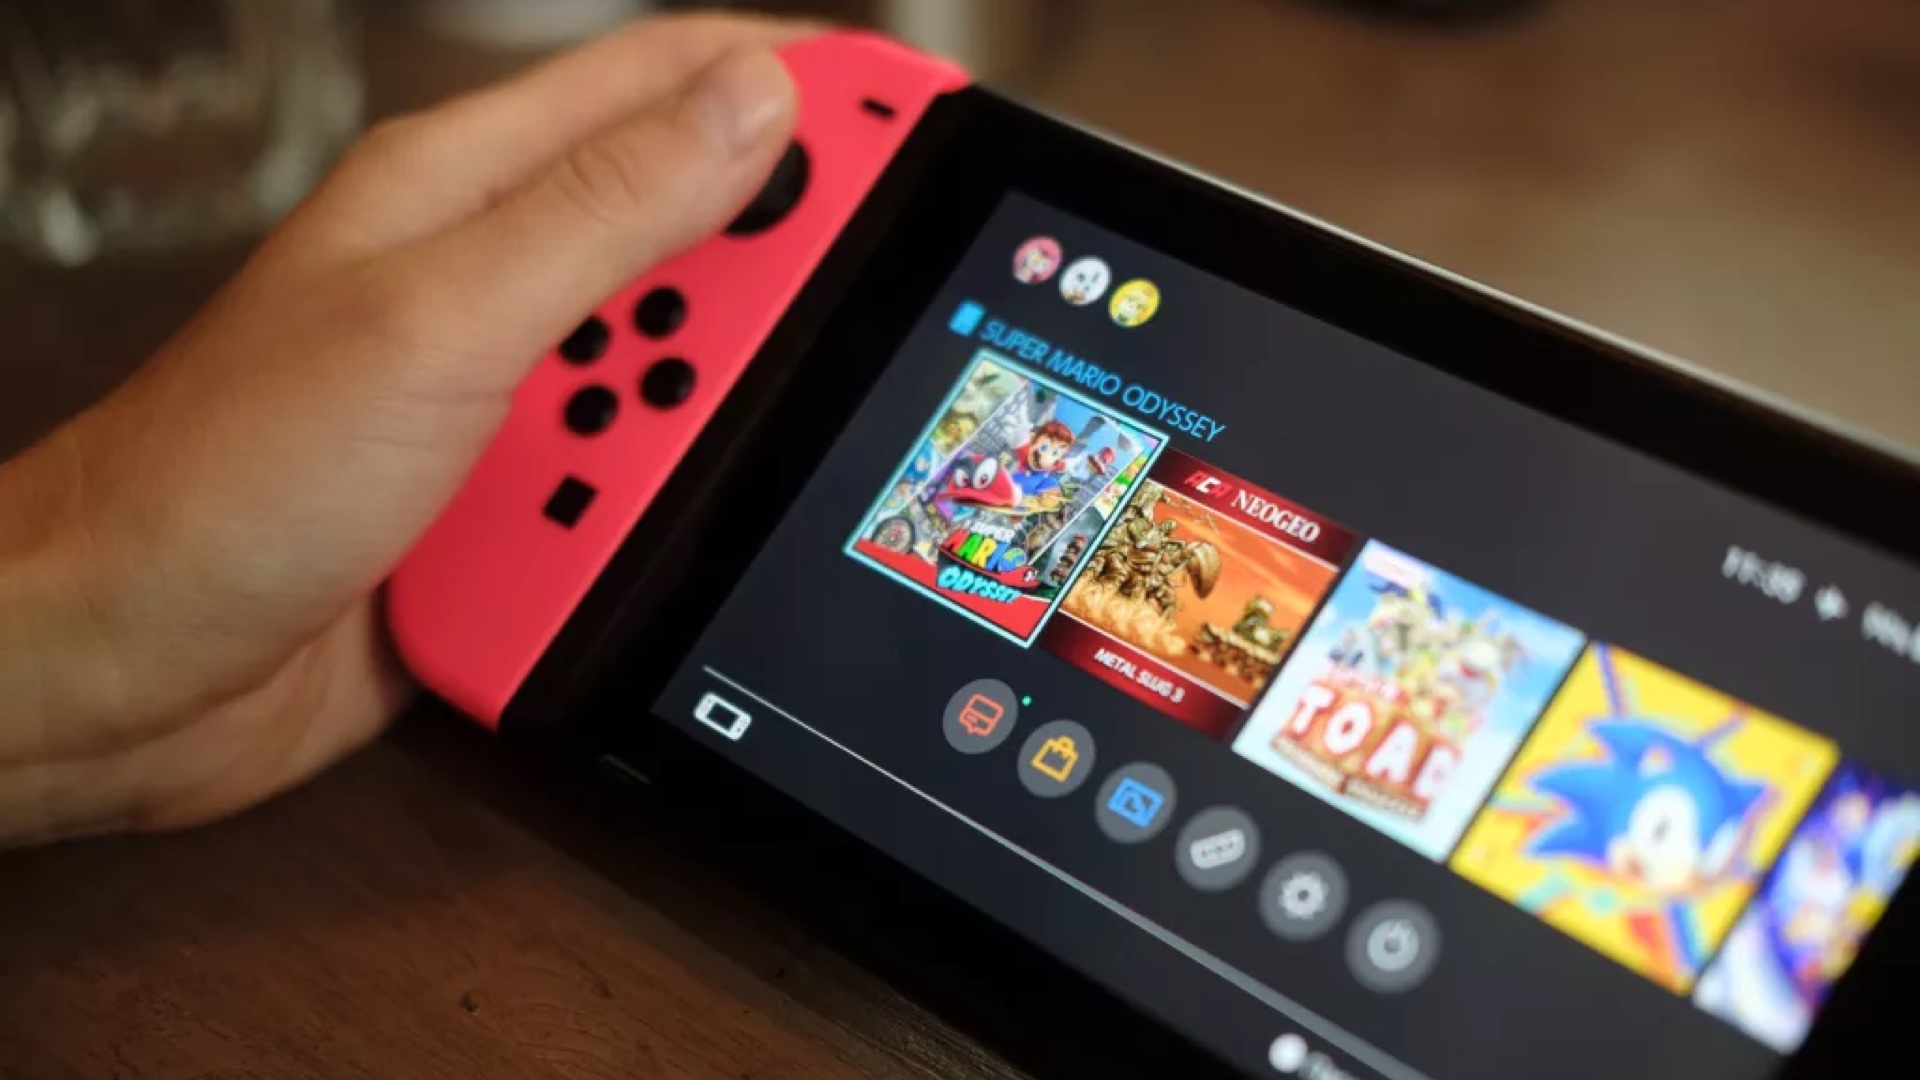 Nintendo Switch review: a brave and fascinating new console